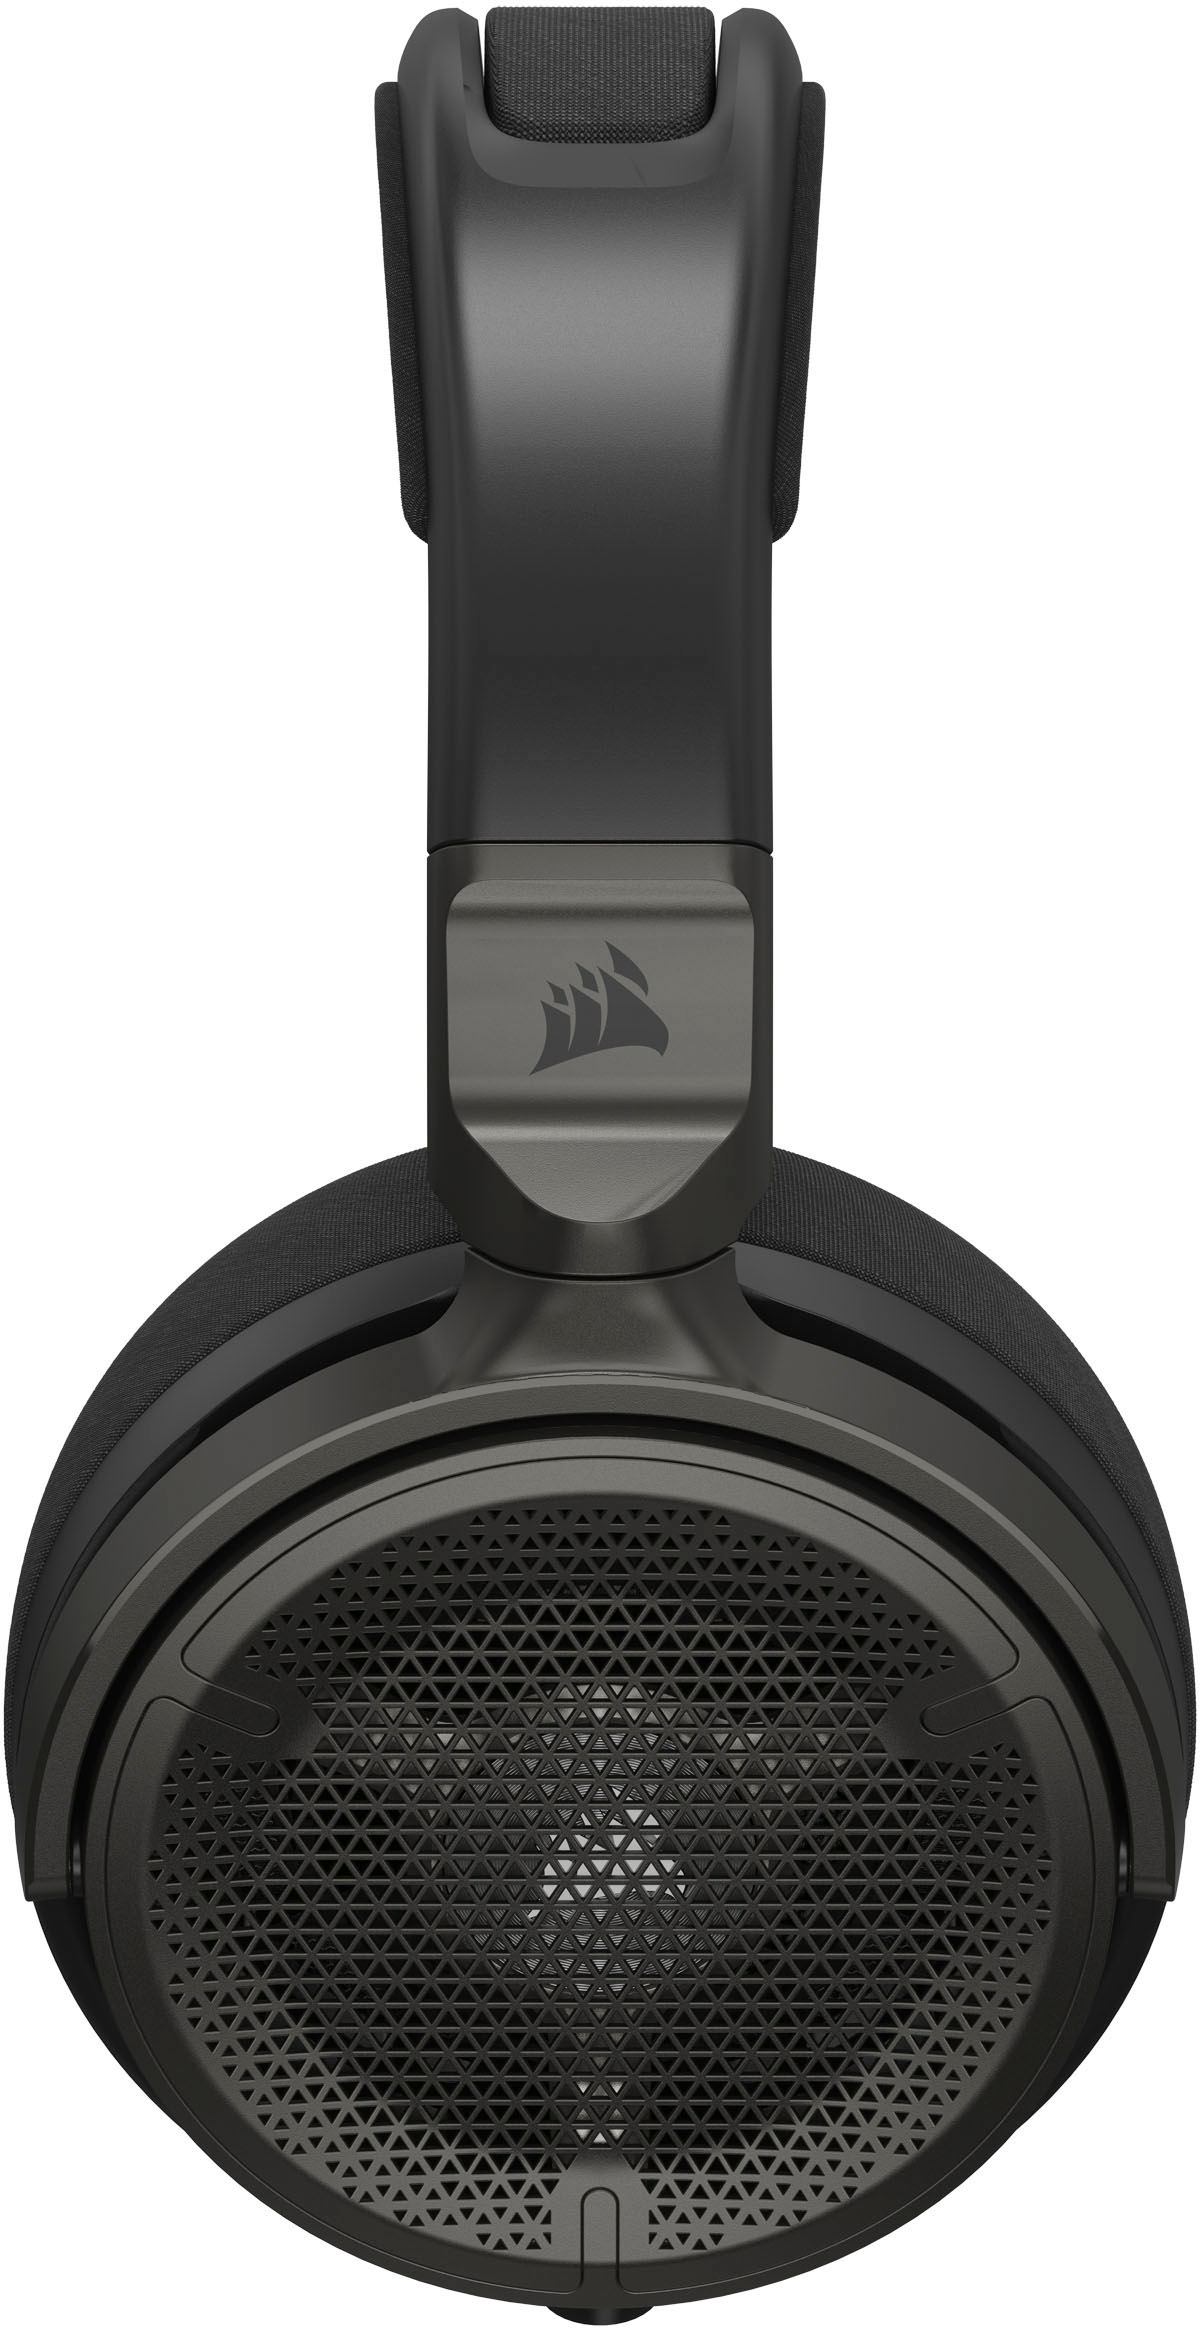 Hear What Matters – Introducing the CORSAIR VIRTUOSO PRO Open Back  Streaming/Gaming Headset